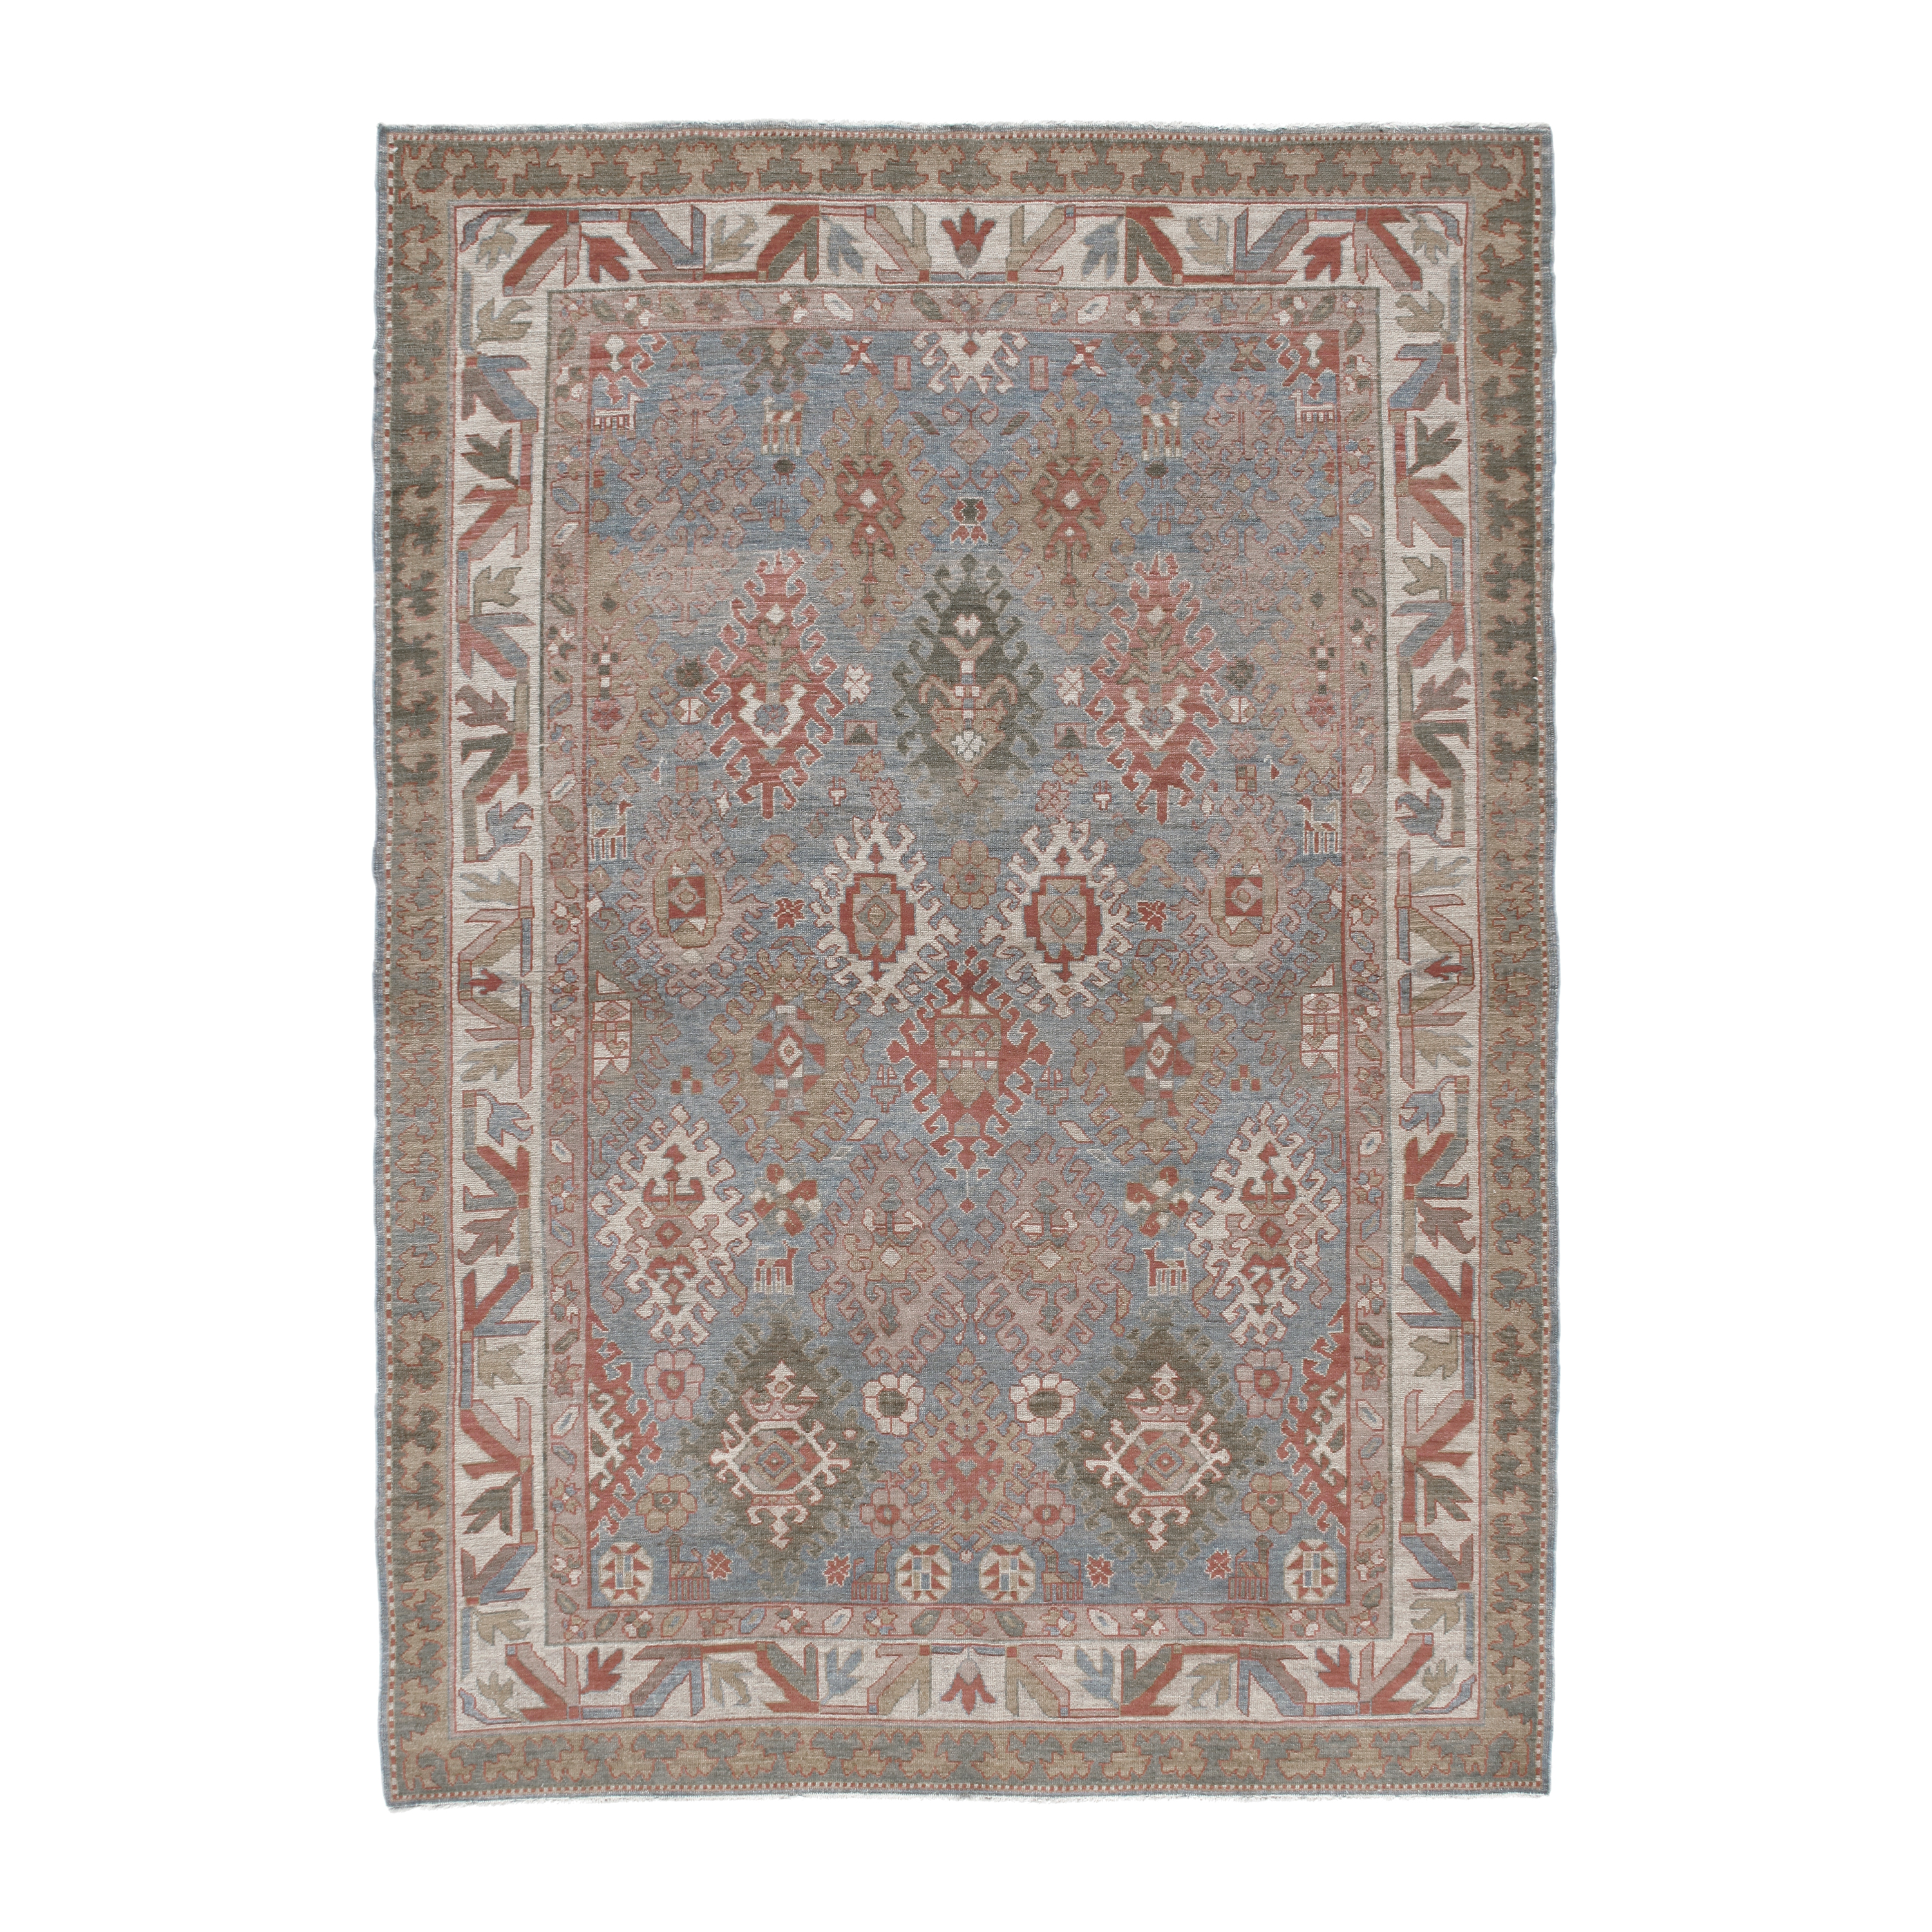 This Persian Kurdish rug is made of 100% wool.